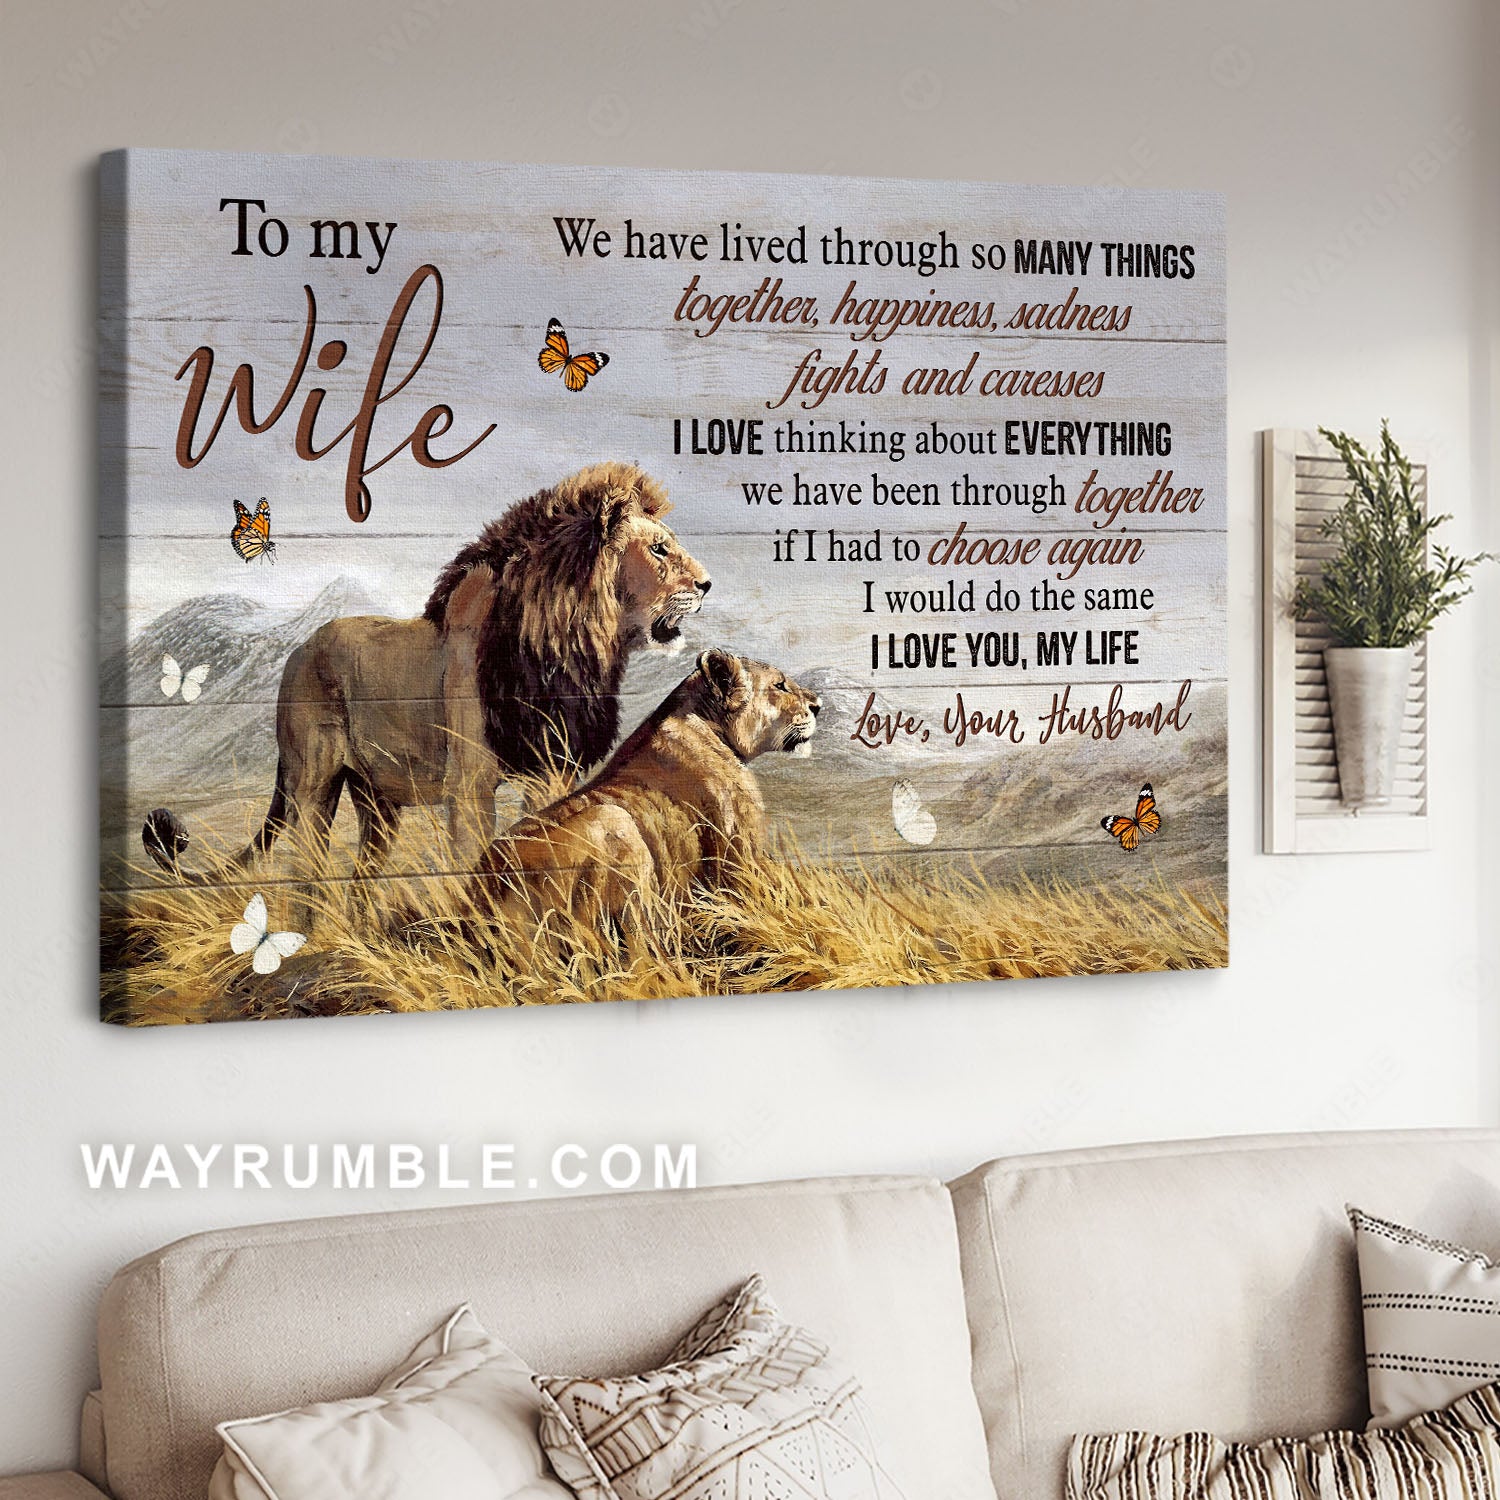 To my wife, Lion couple, Tranquil scenery, We have lived through many things together - Family Landscape Canvas Prints, Wall Art